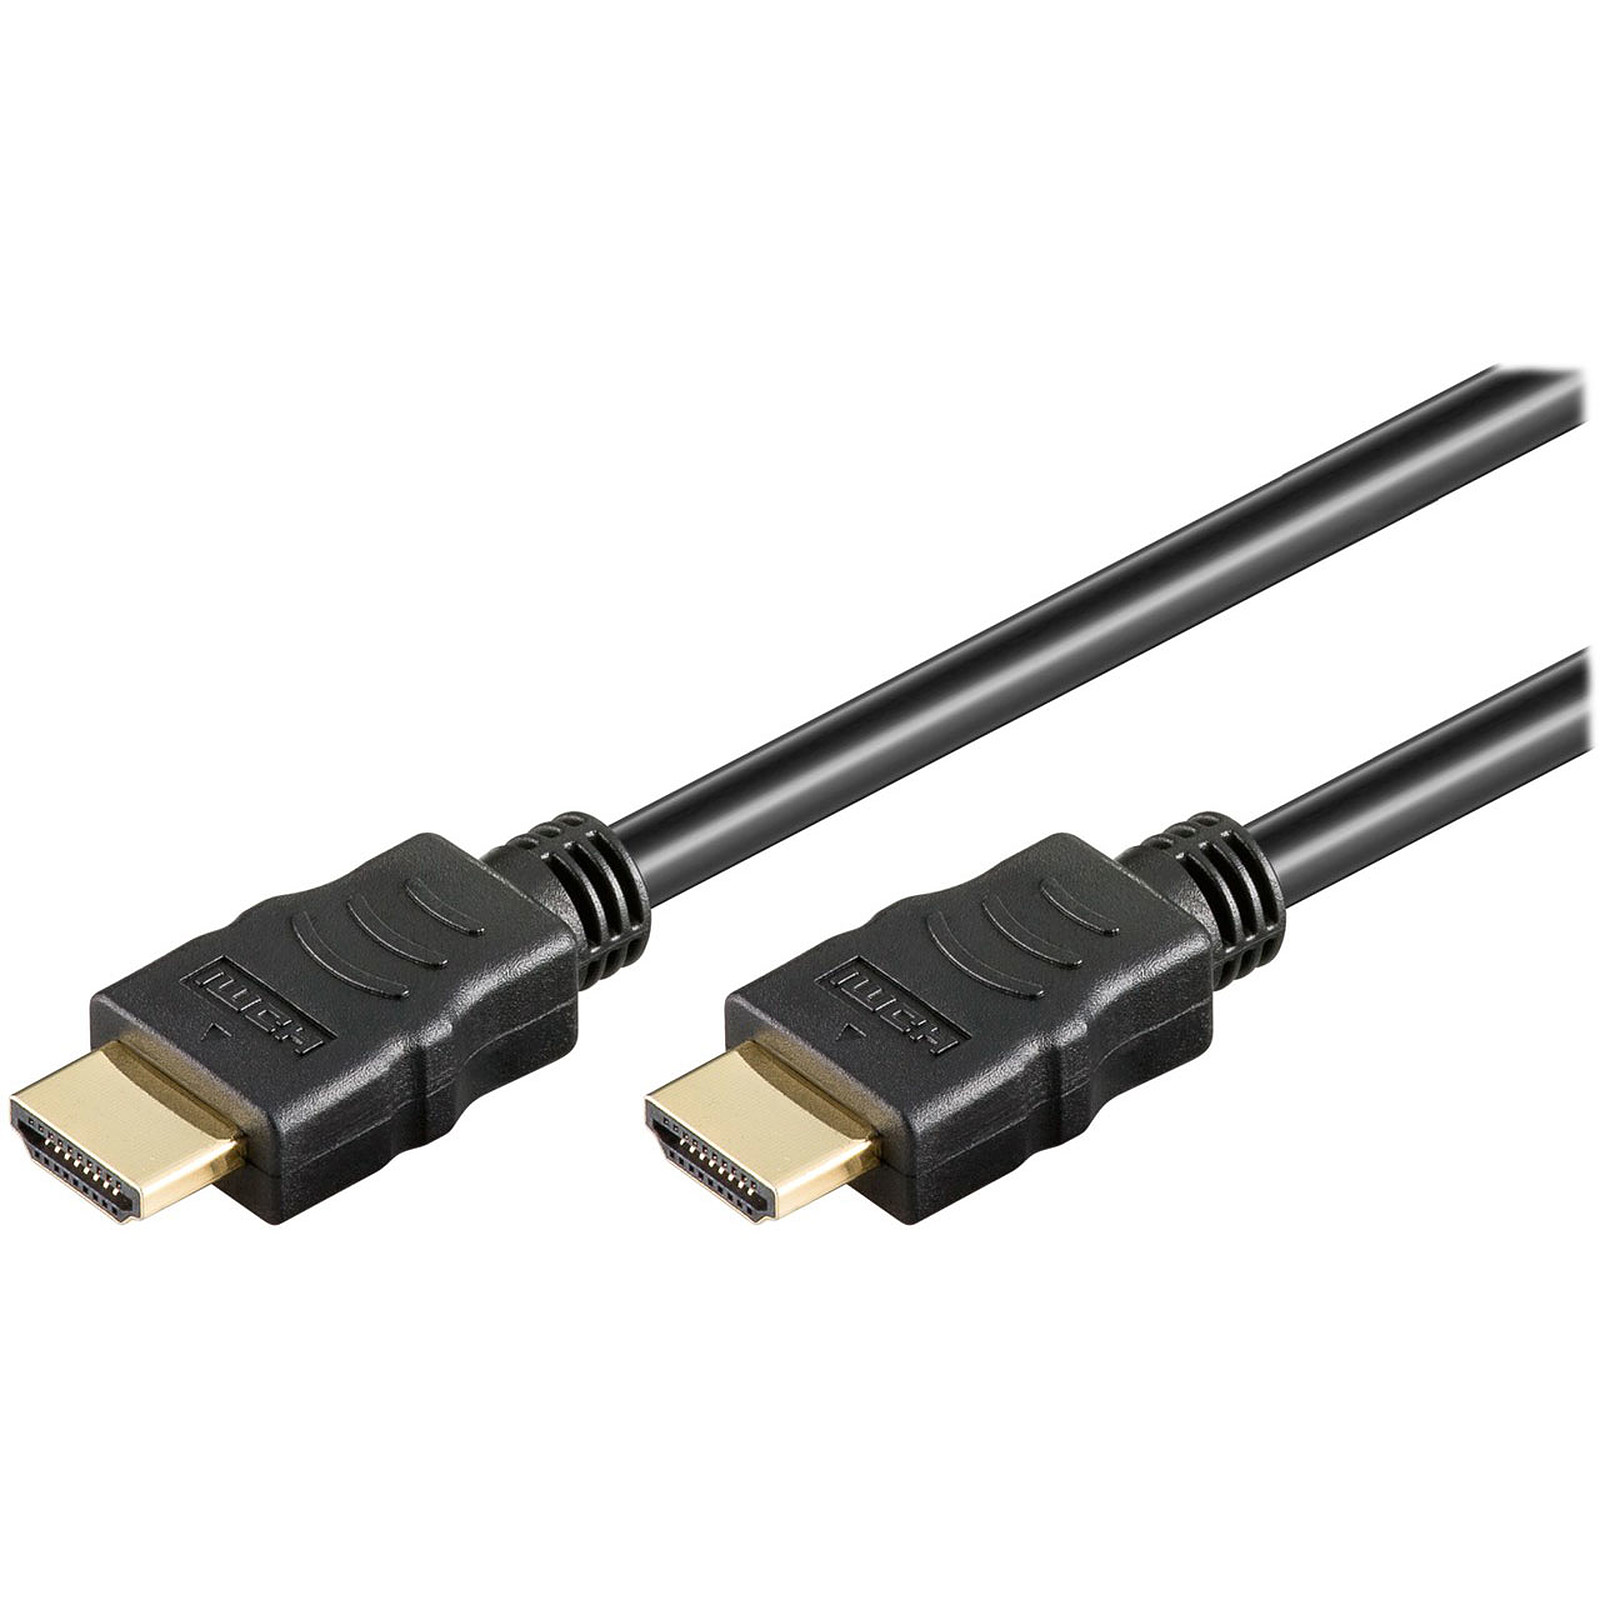 Goobay High Speed HDMI Cable with Ethernet (15 m) - HDMI Goobay